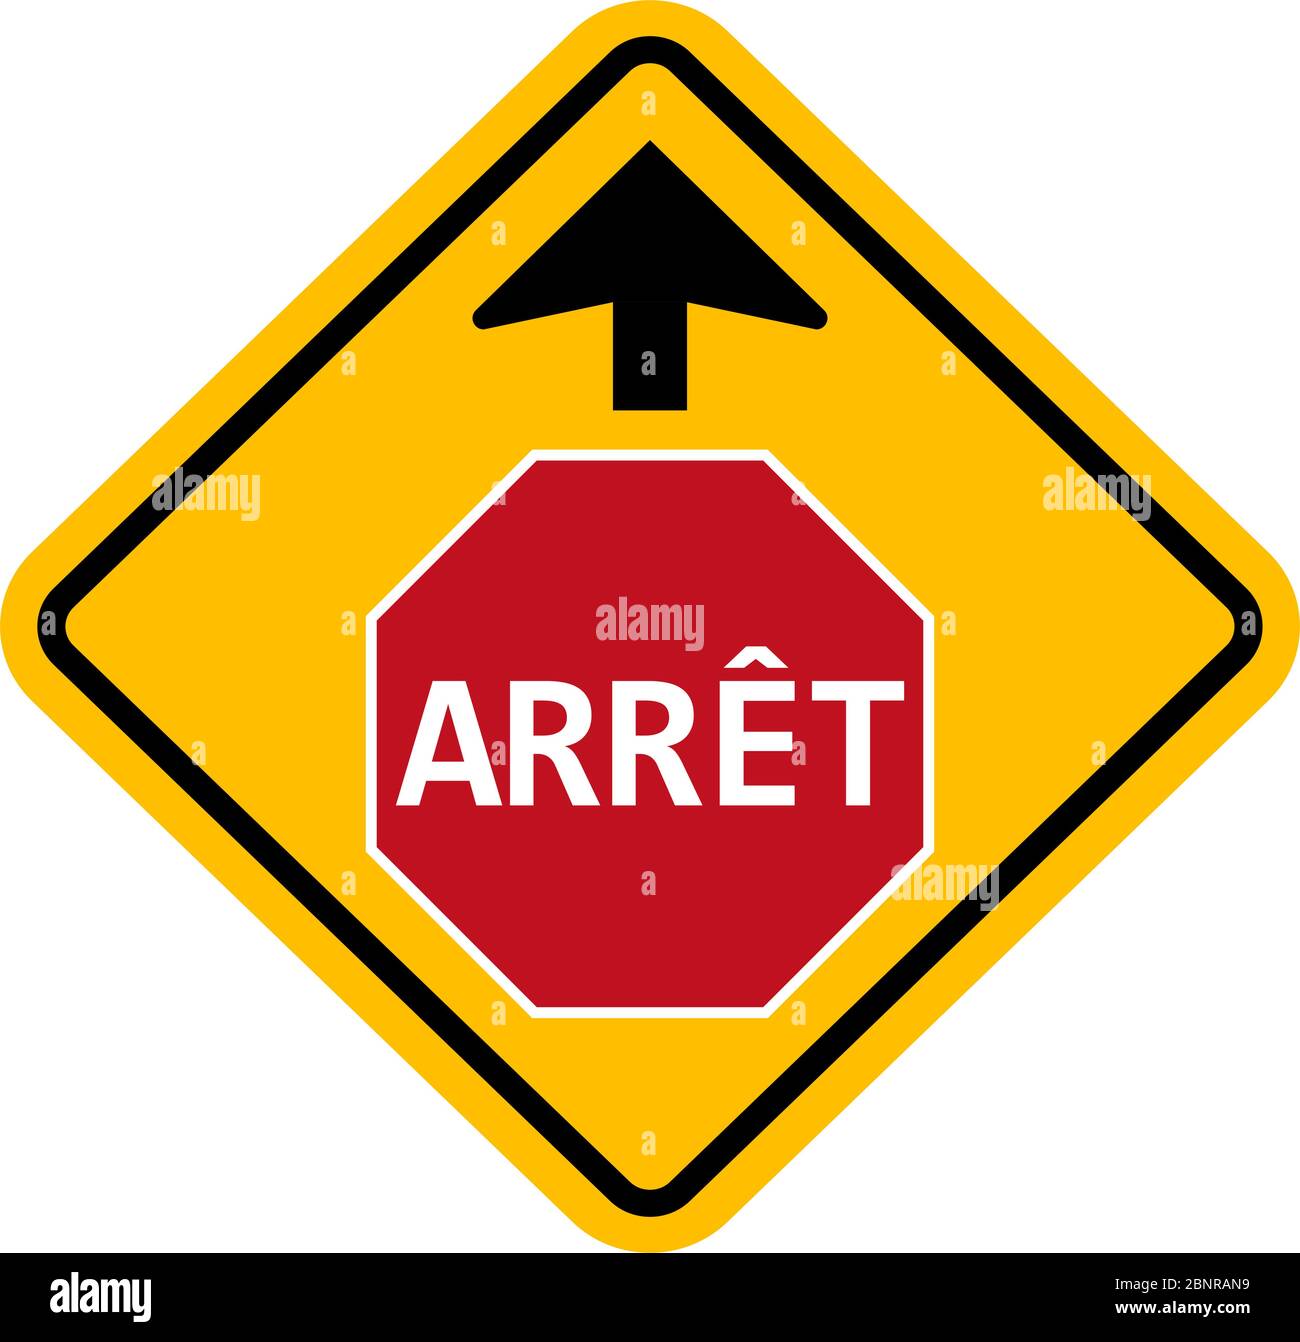 Stop sign warning and give way ahead traffic symbol. Yellow background. Stock Vector